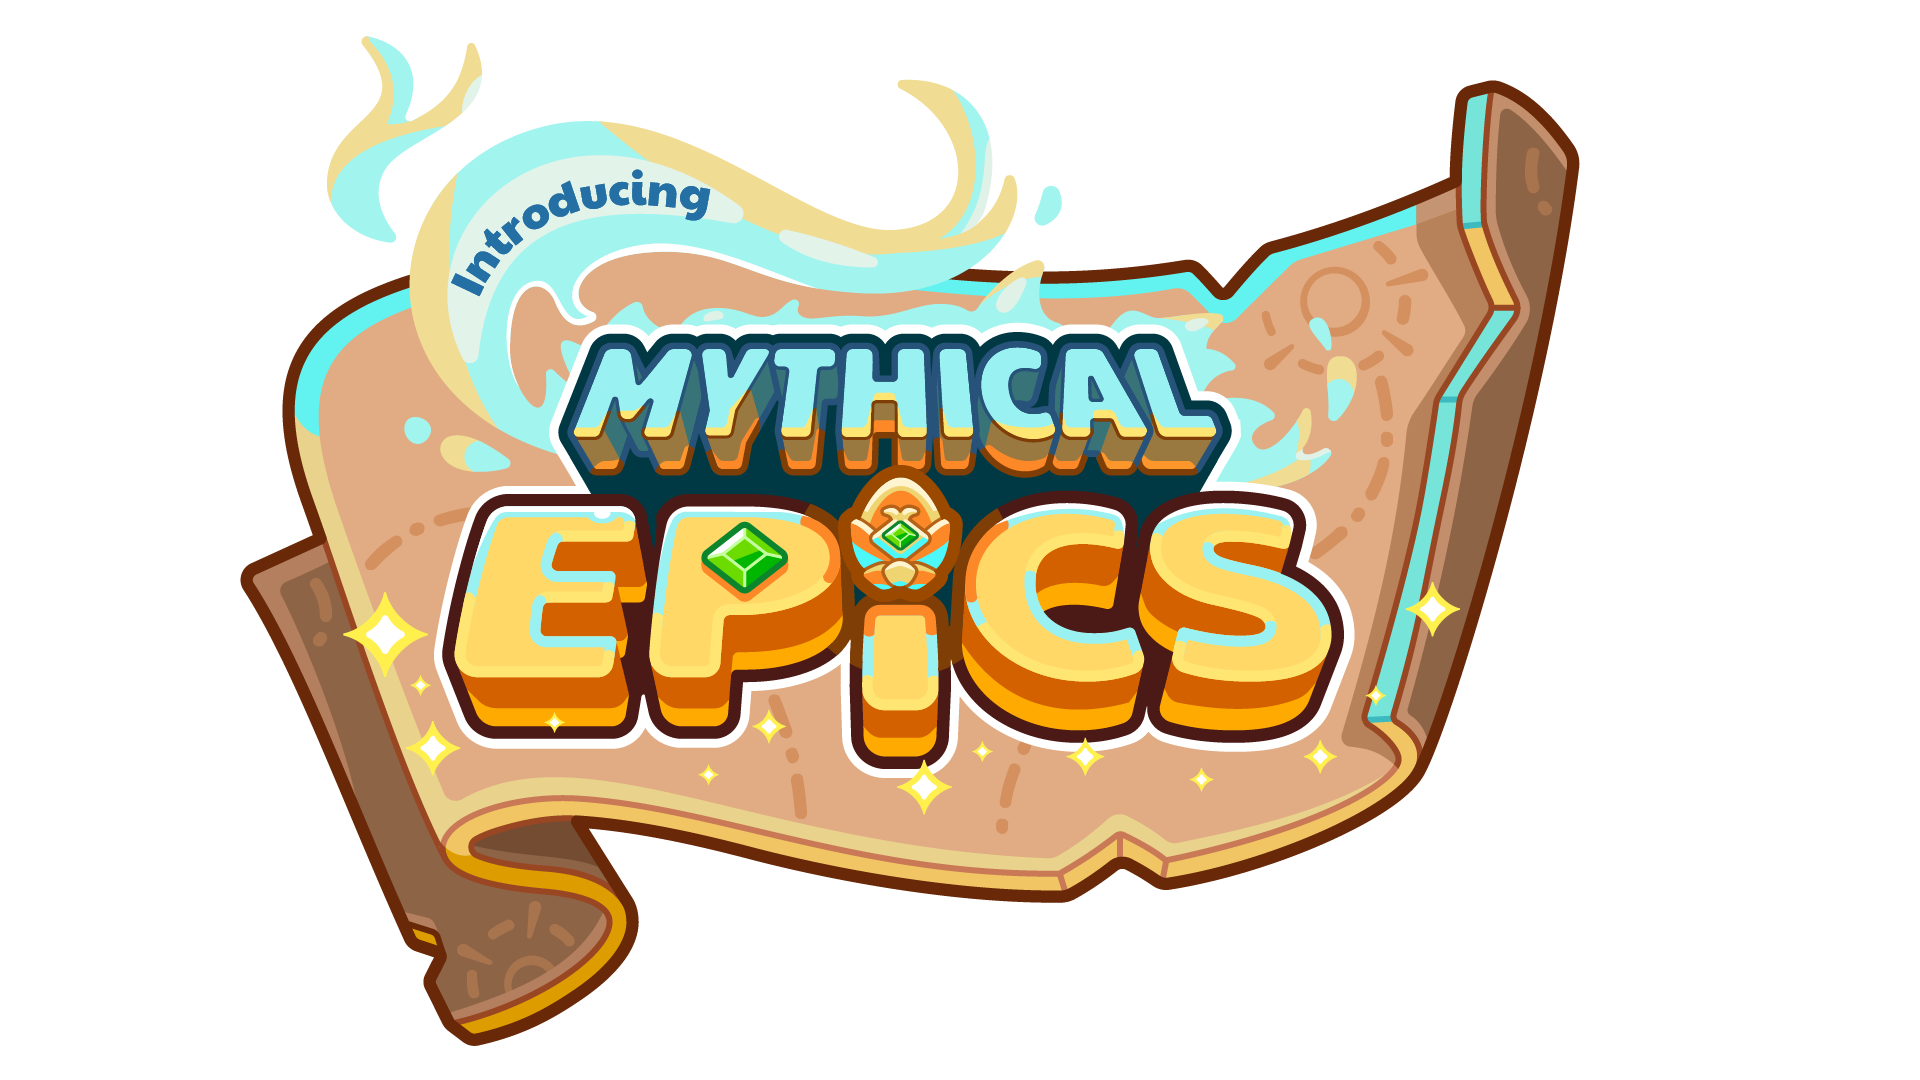 Mythical_Epics_Logo_1920x1080_Introducing.png